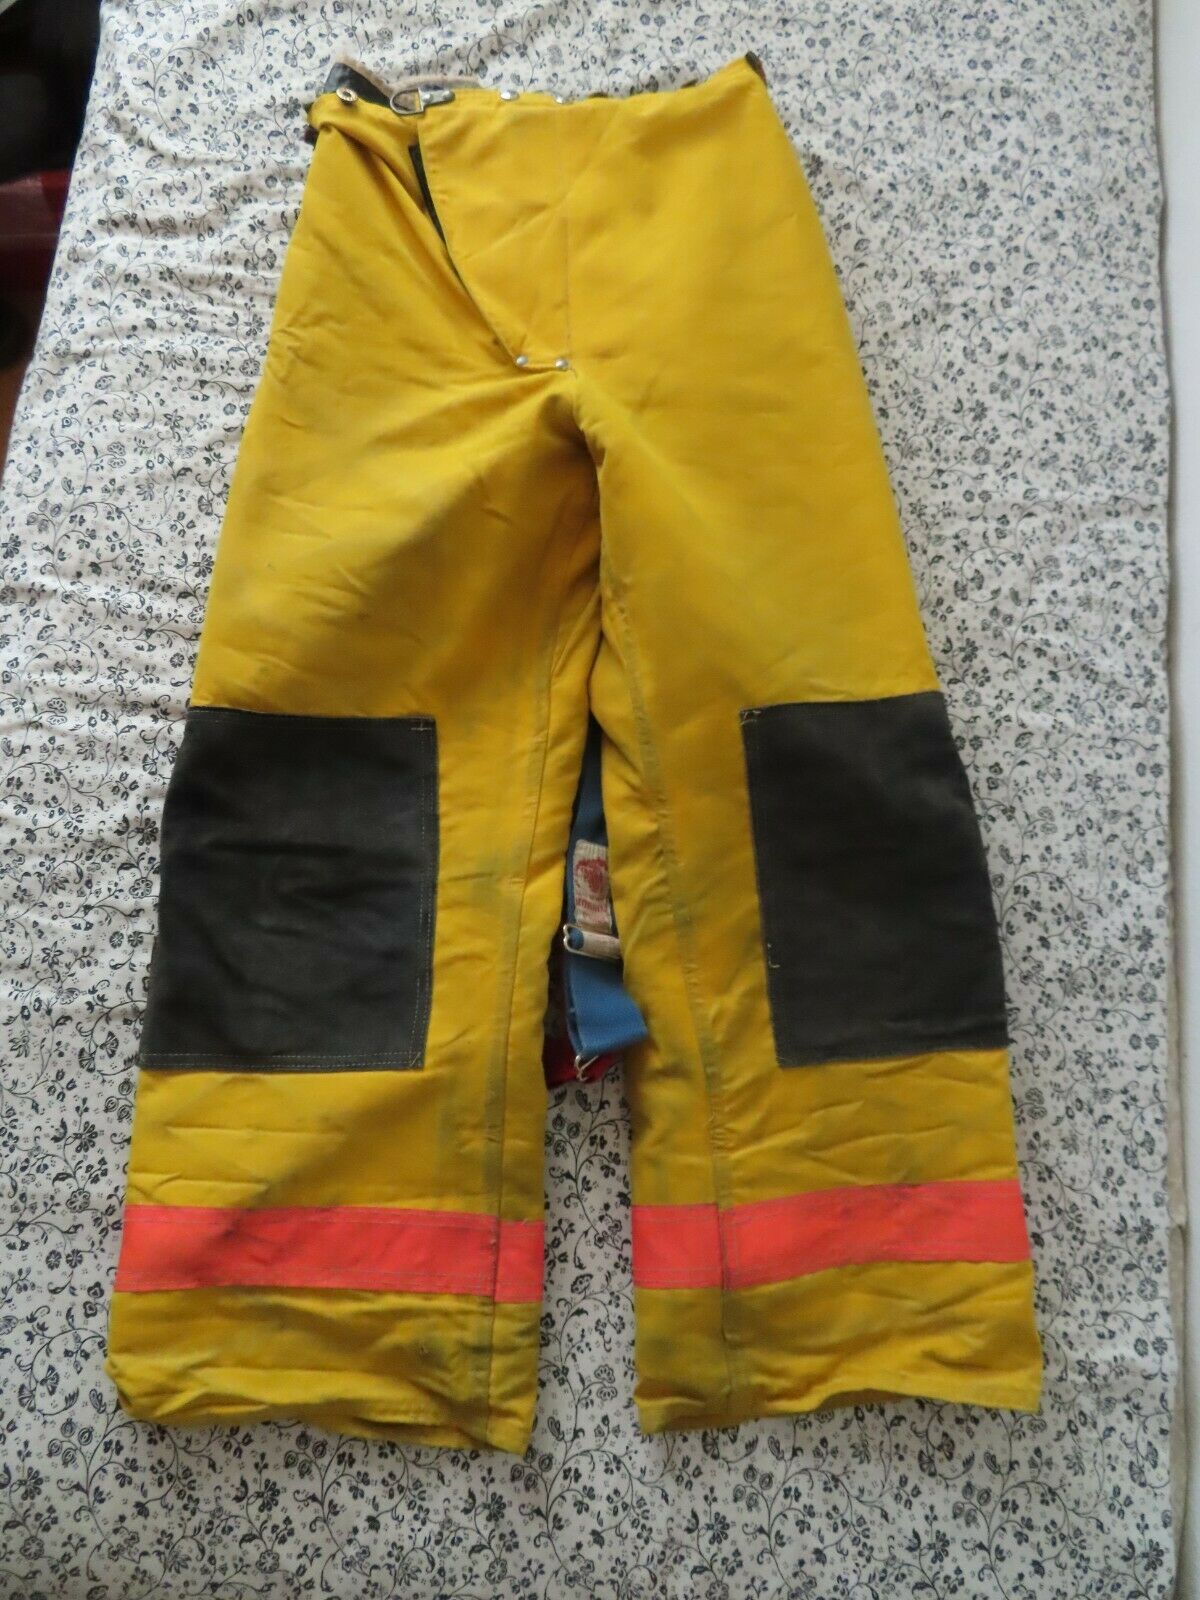 Janesville Firefighter Turnout Gear Pants Small Suspender morning pride 80s 1989